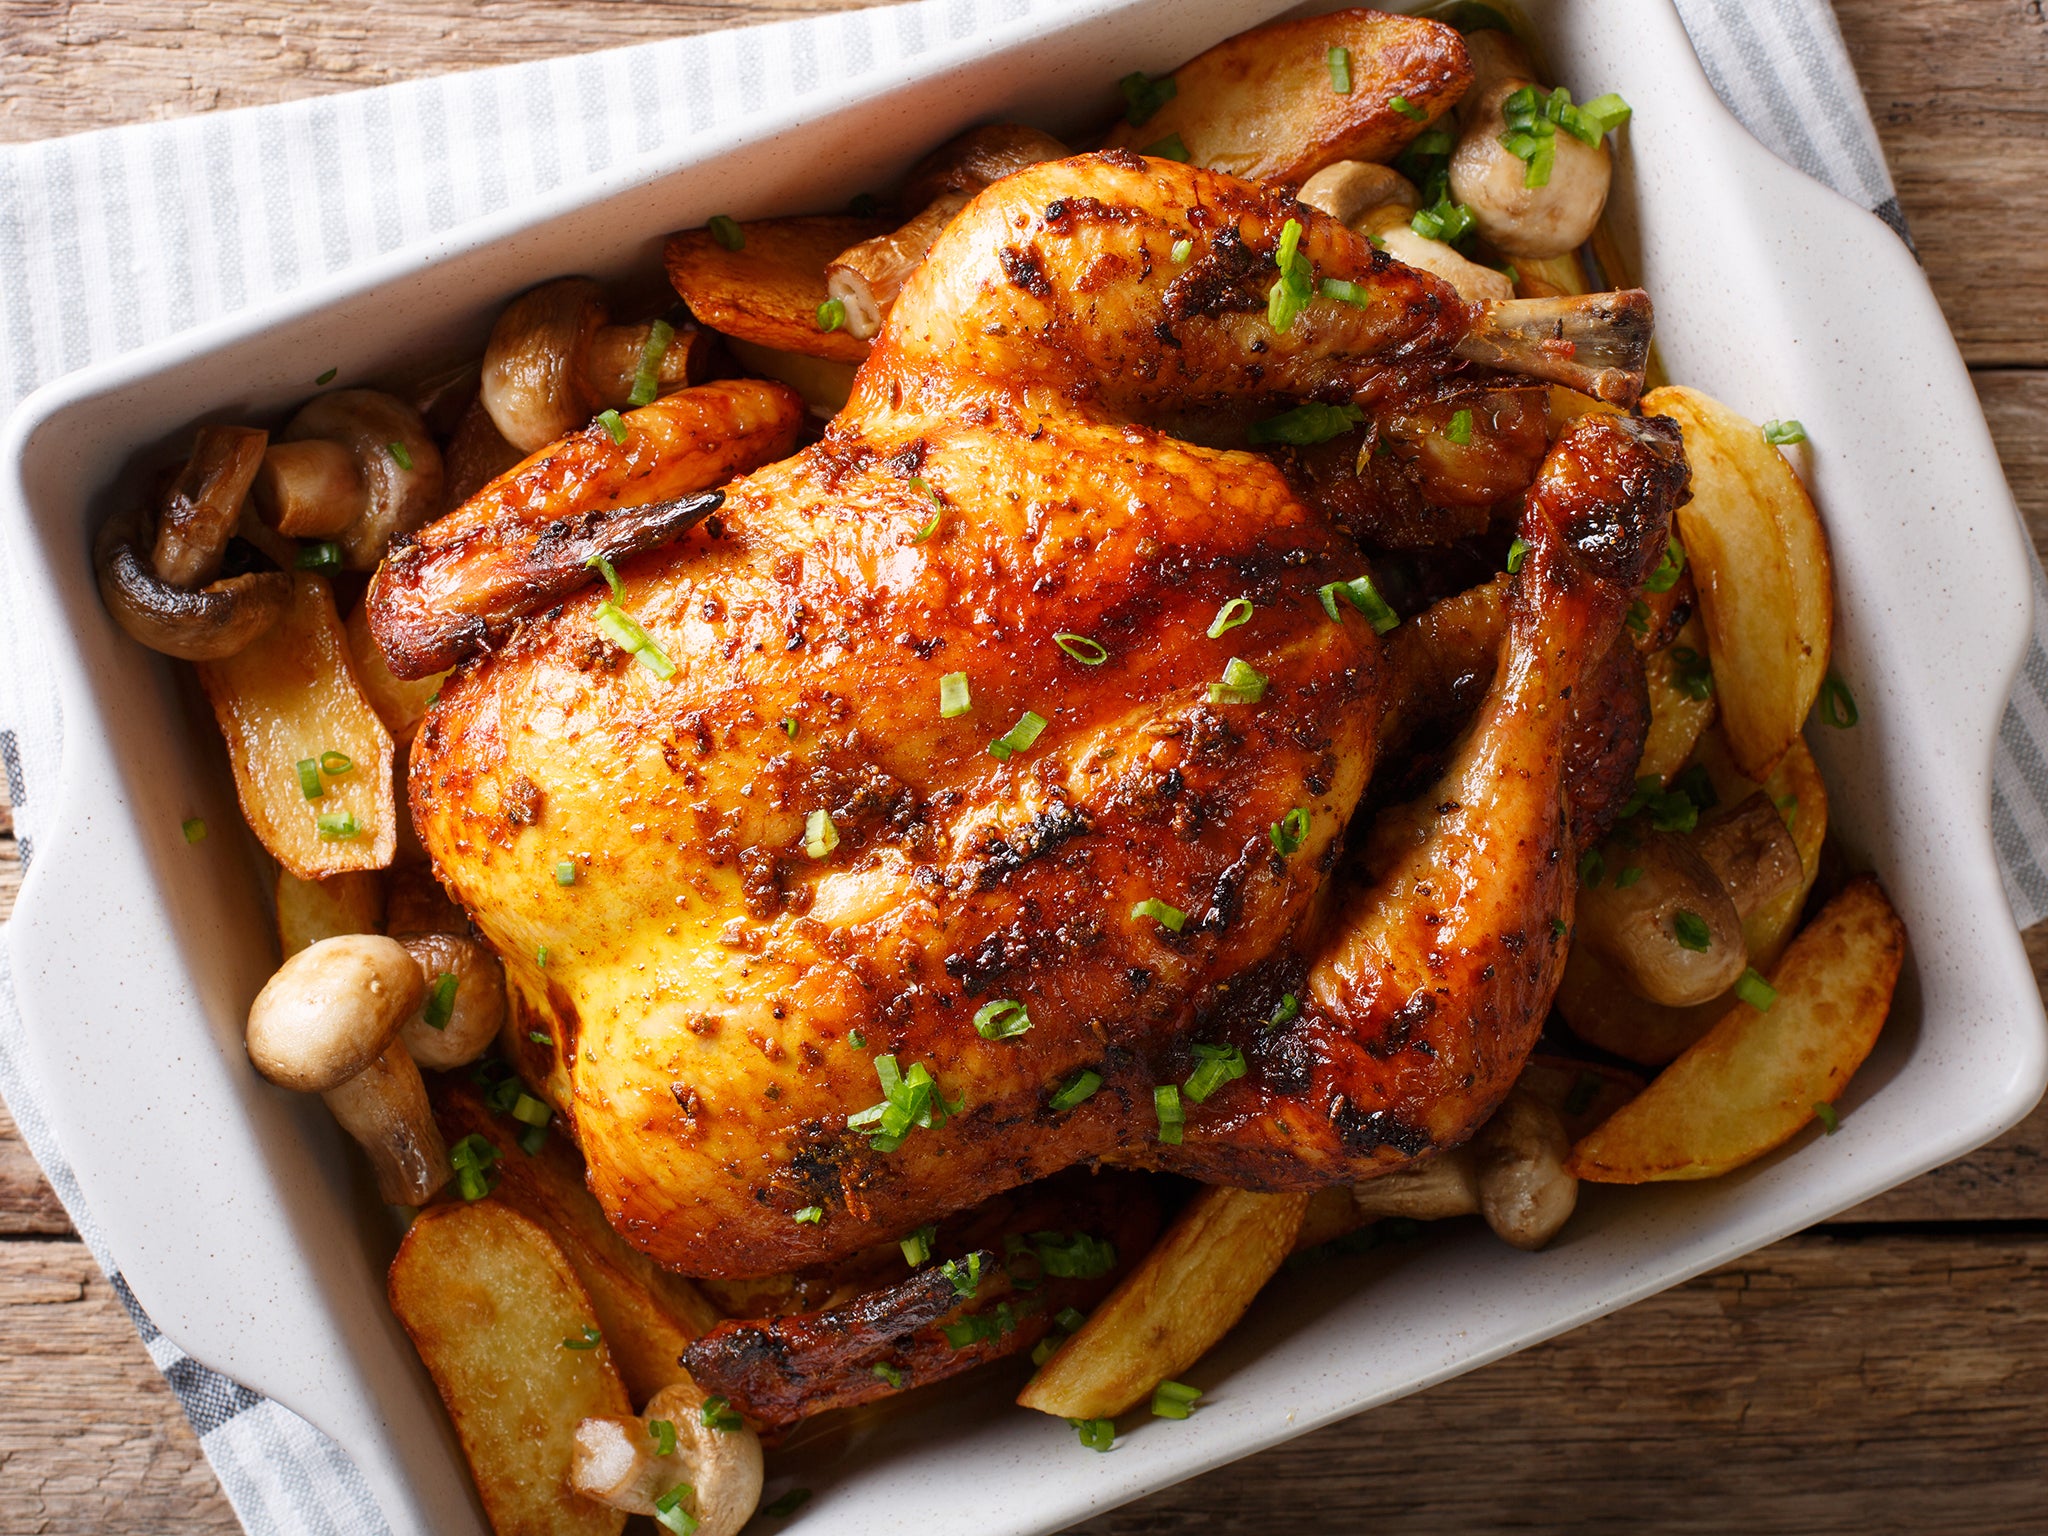 Roast chicken is nicely perfurmed from its green garlic, rosemary, sage and thyme stuffing